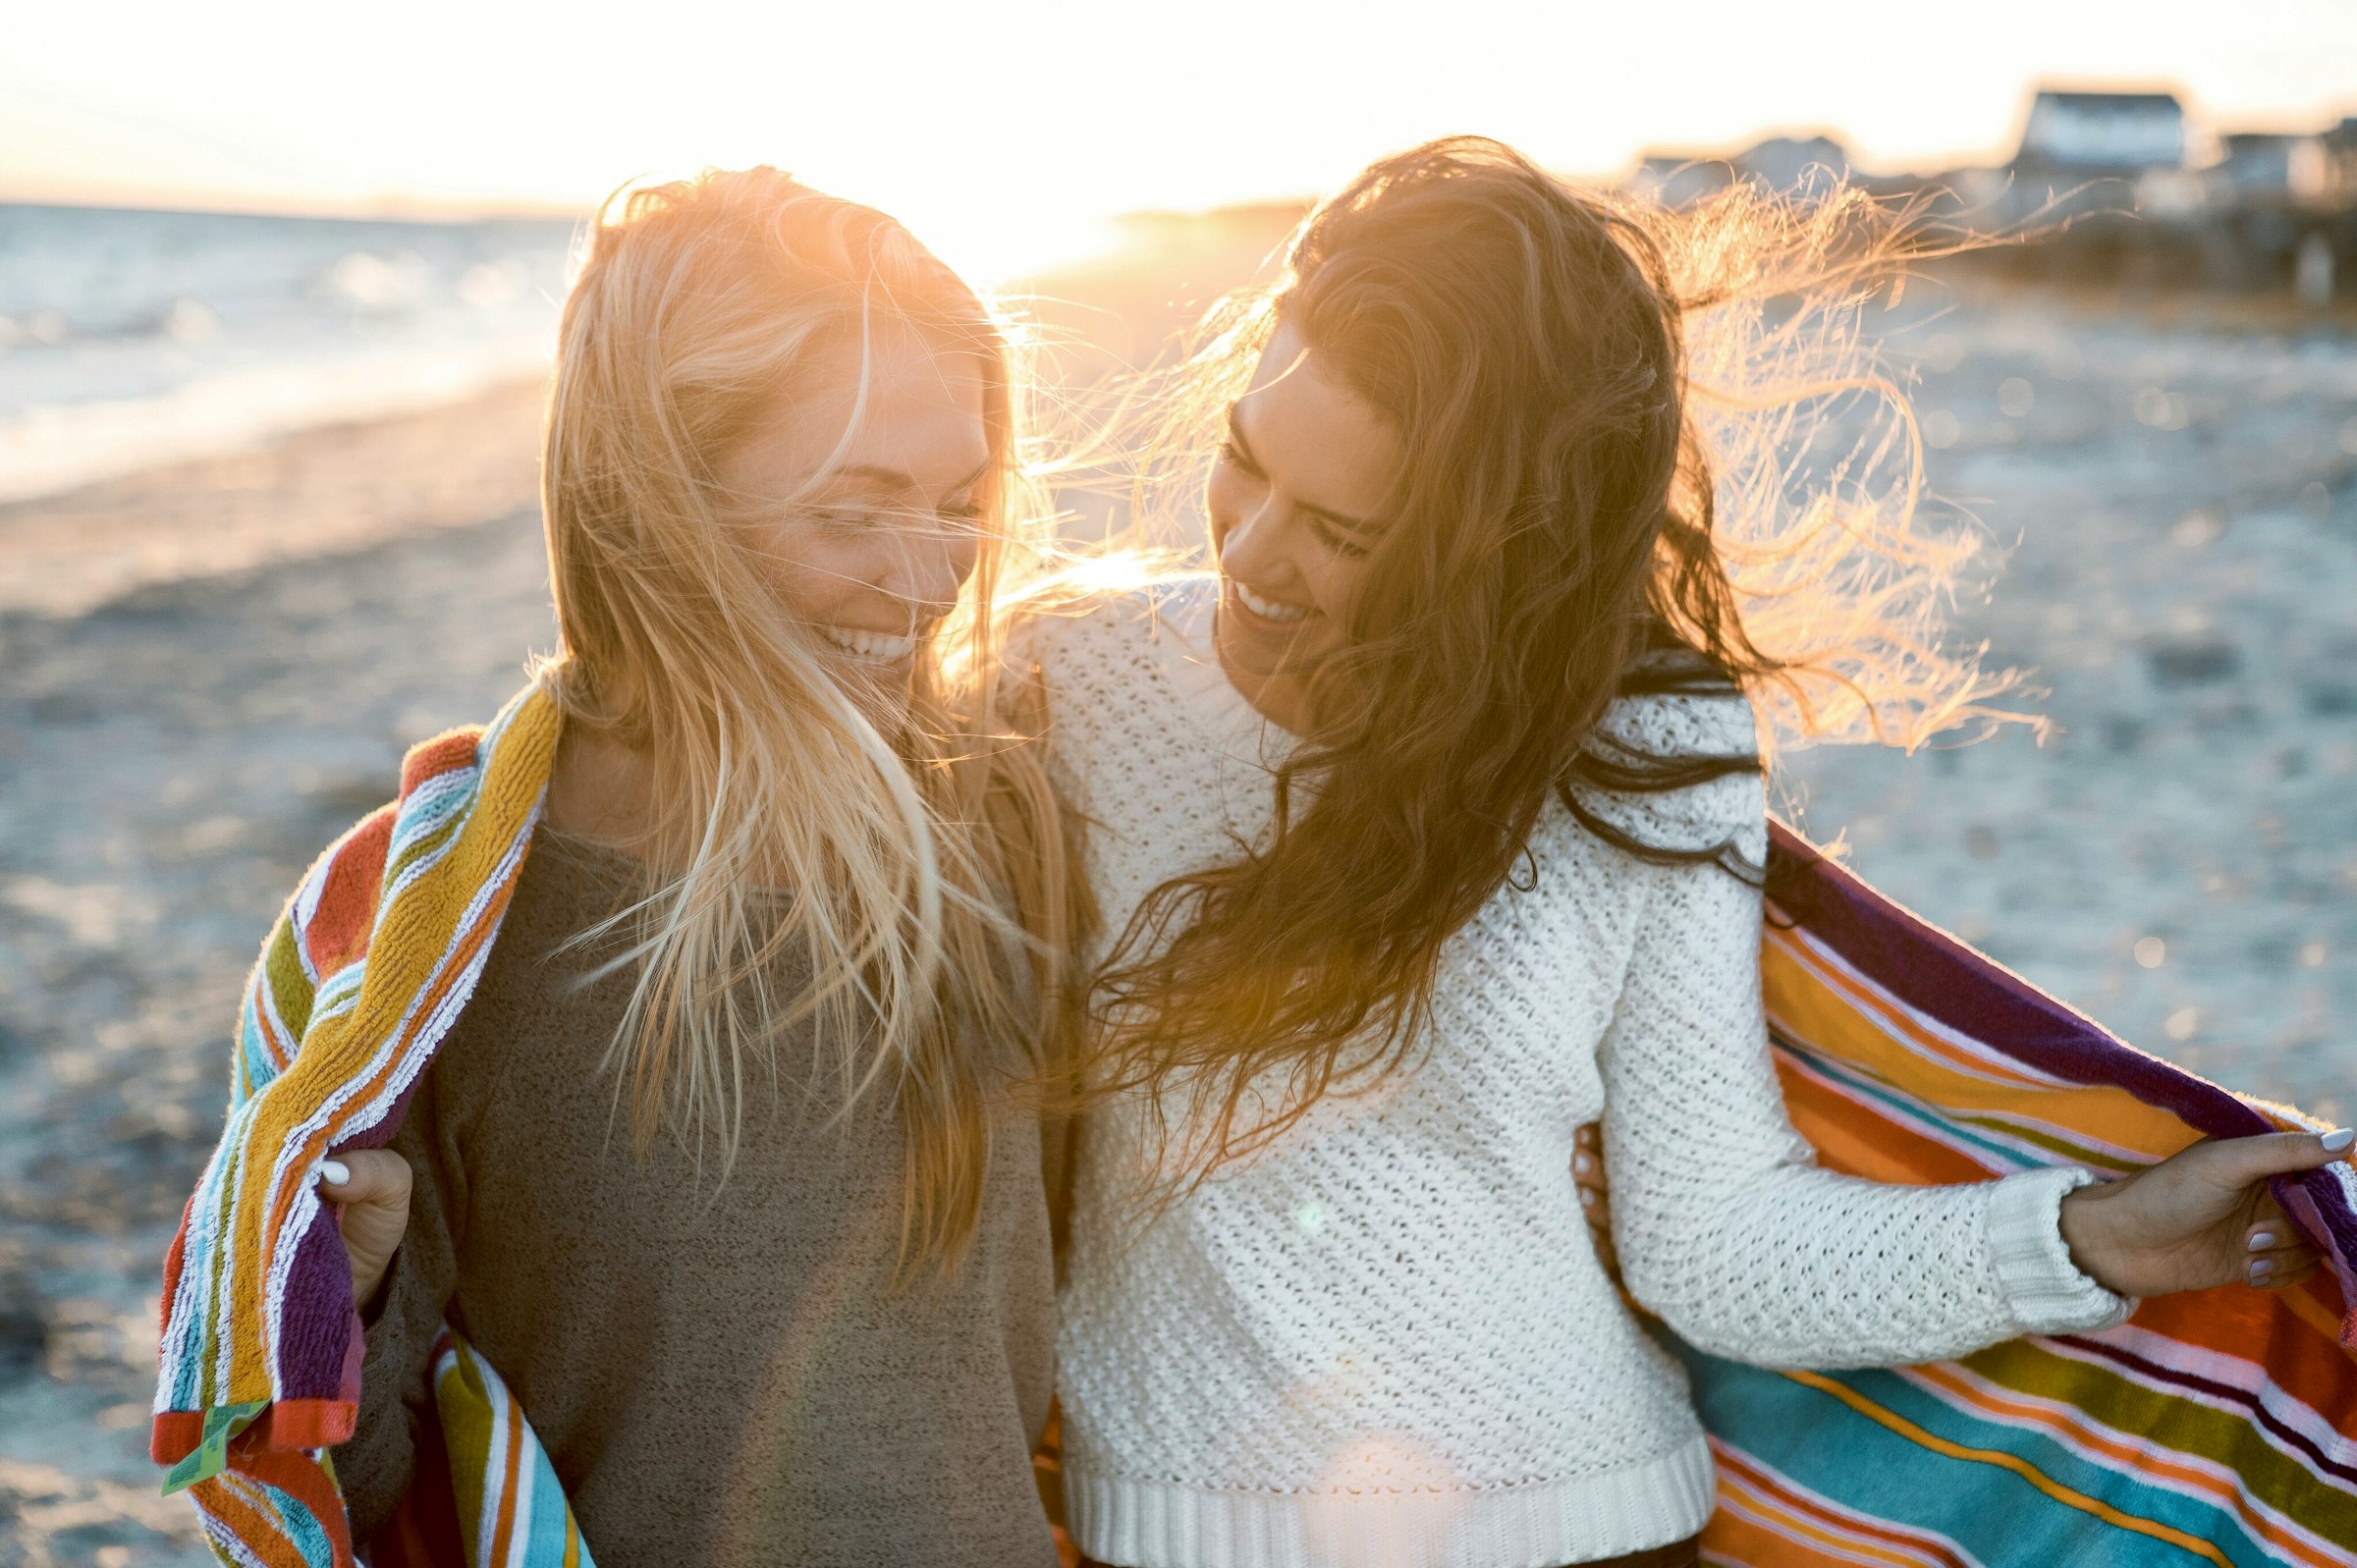 Two similig women at the beach | Source: Unsplash